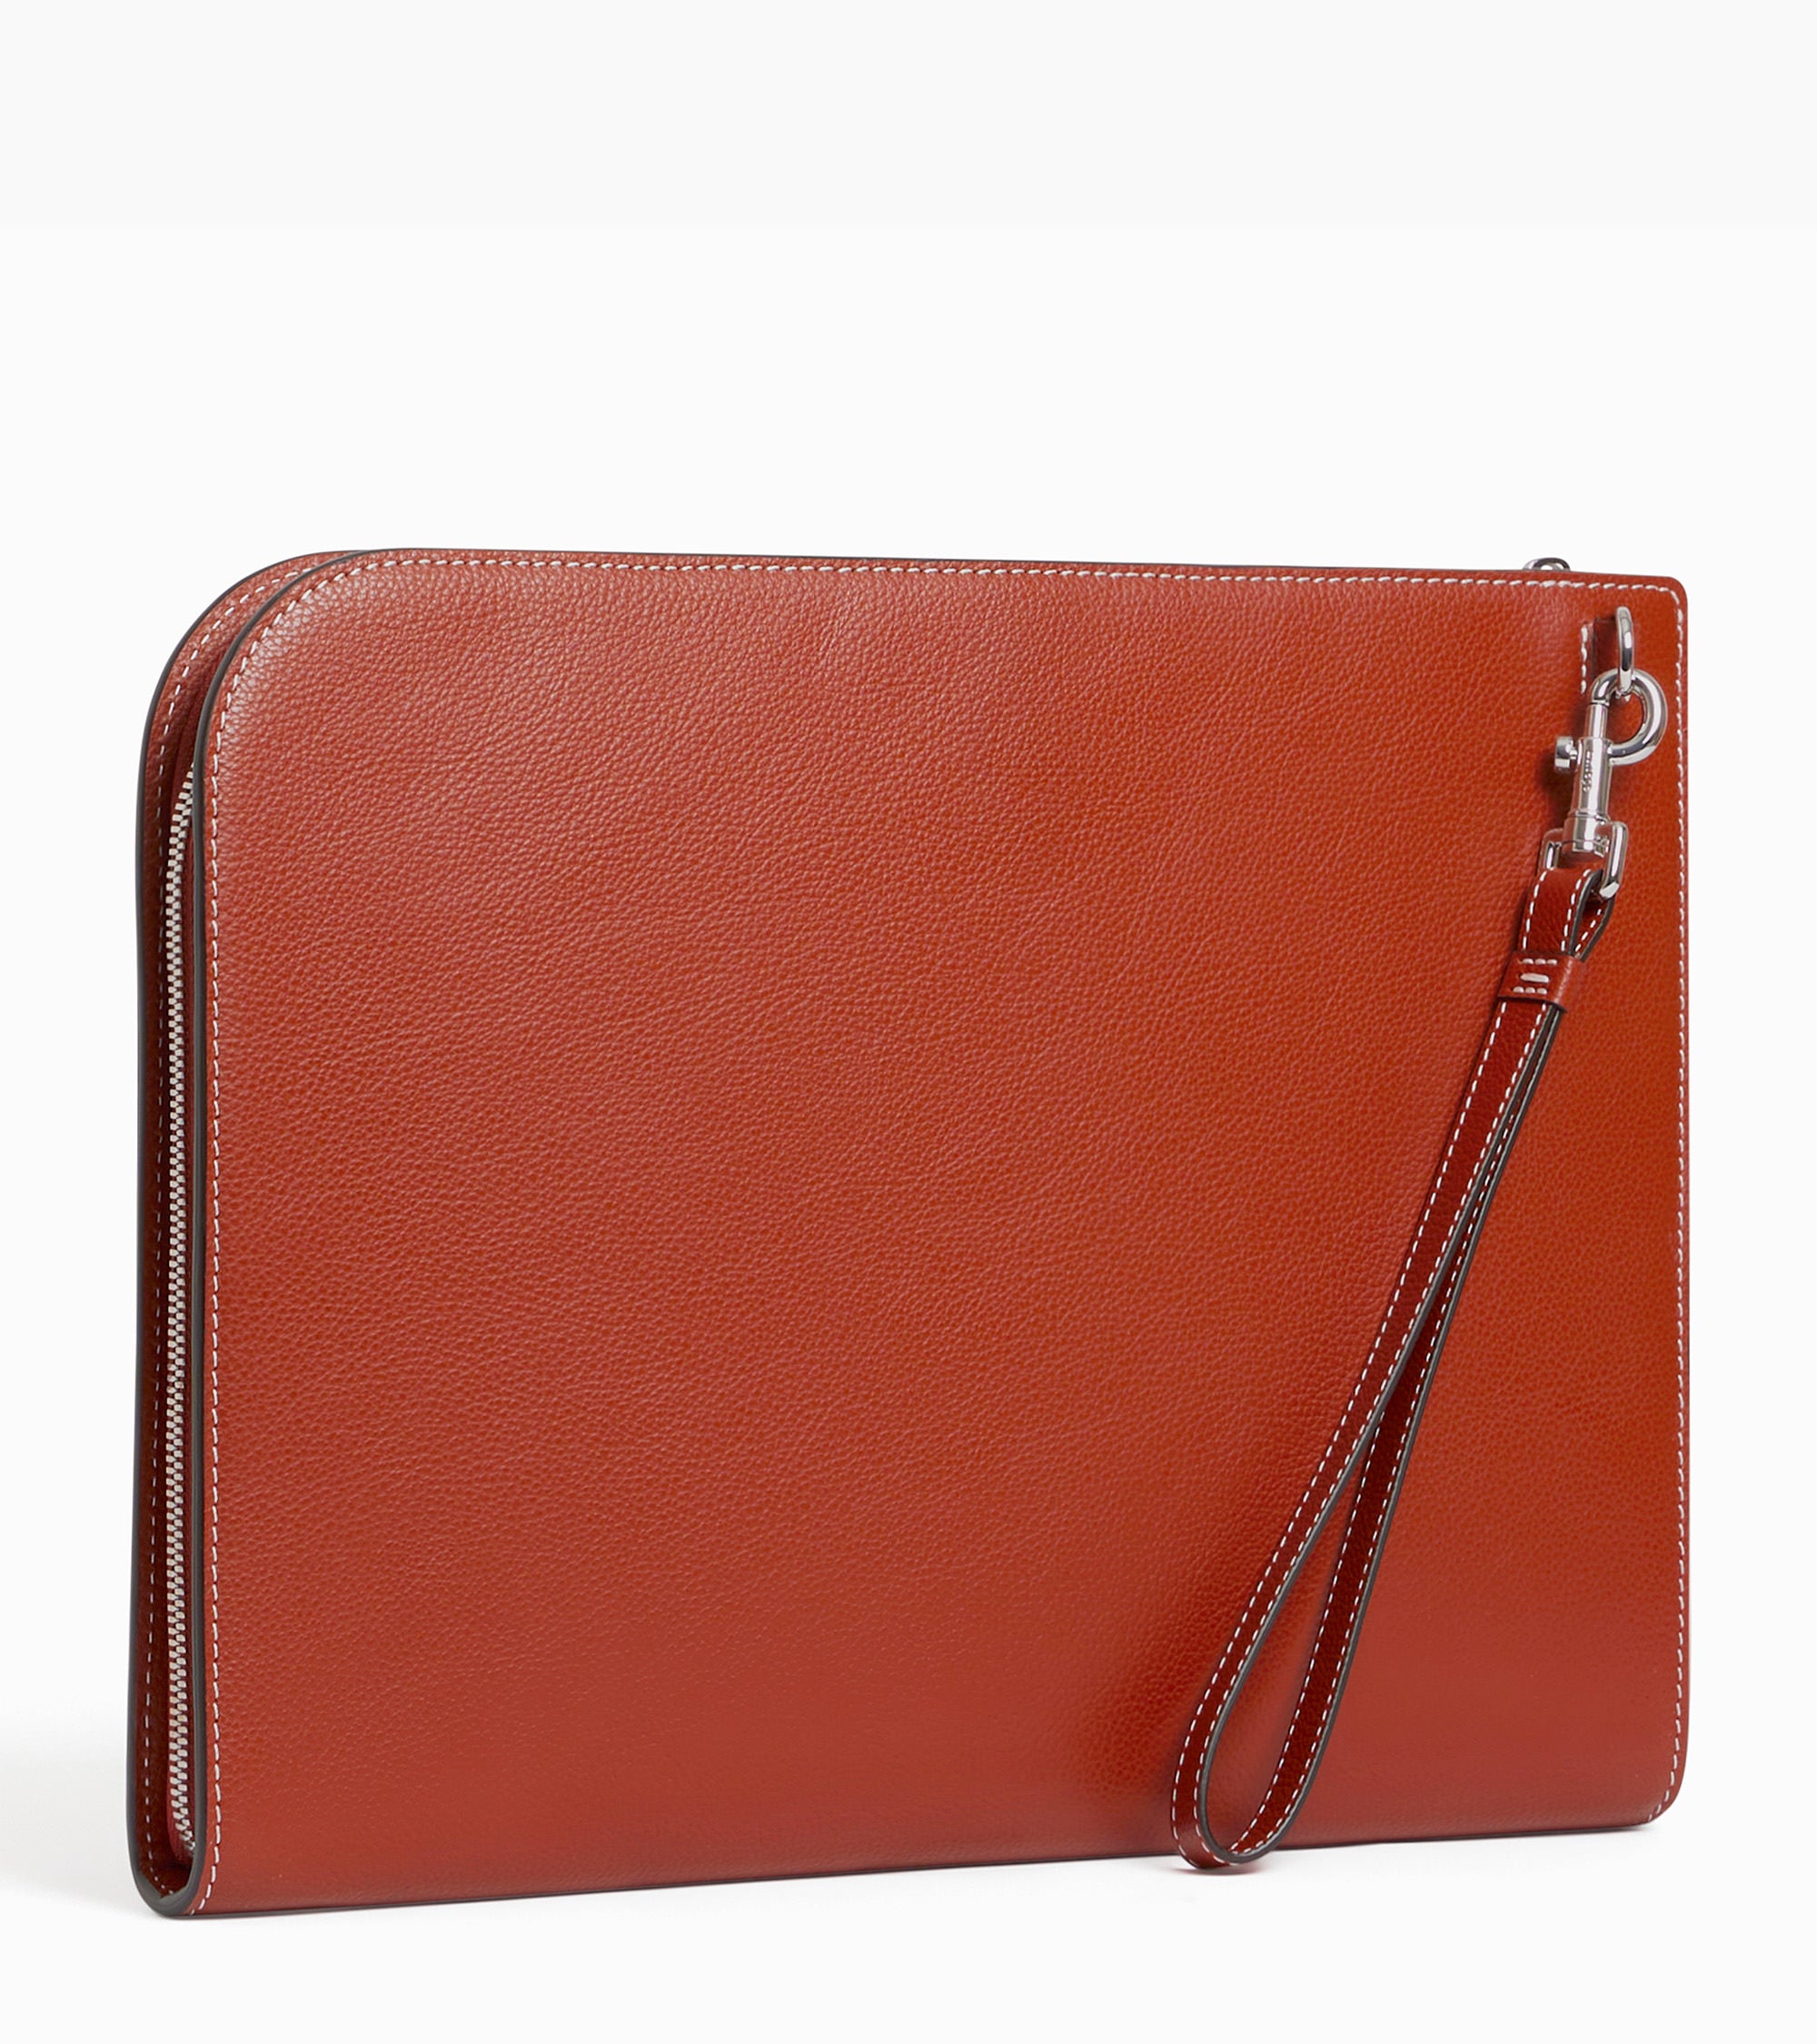 Emile A4 pouch in grained leather